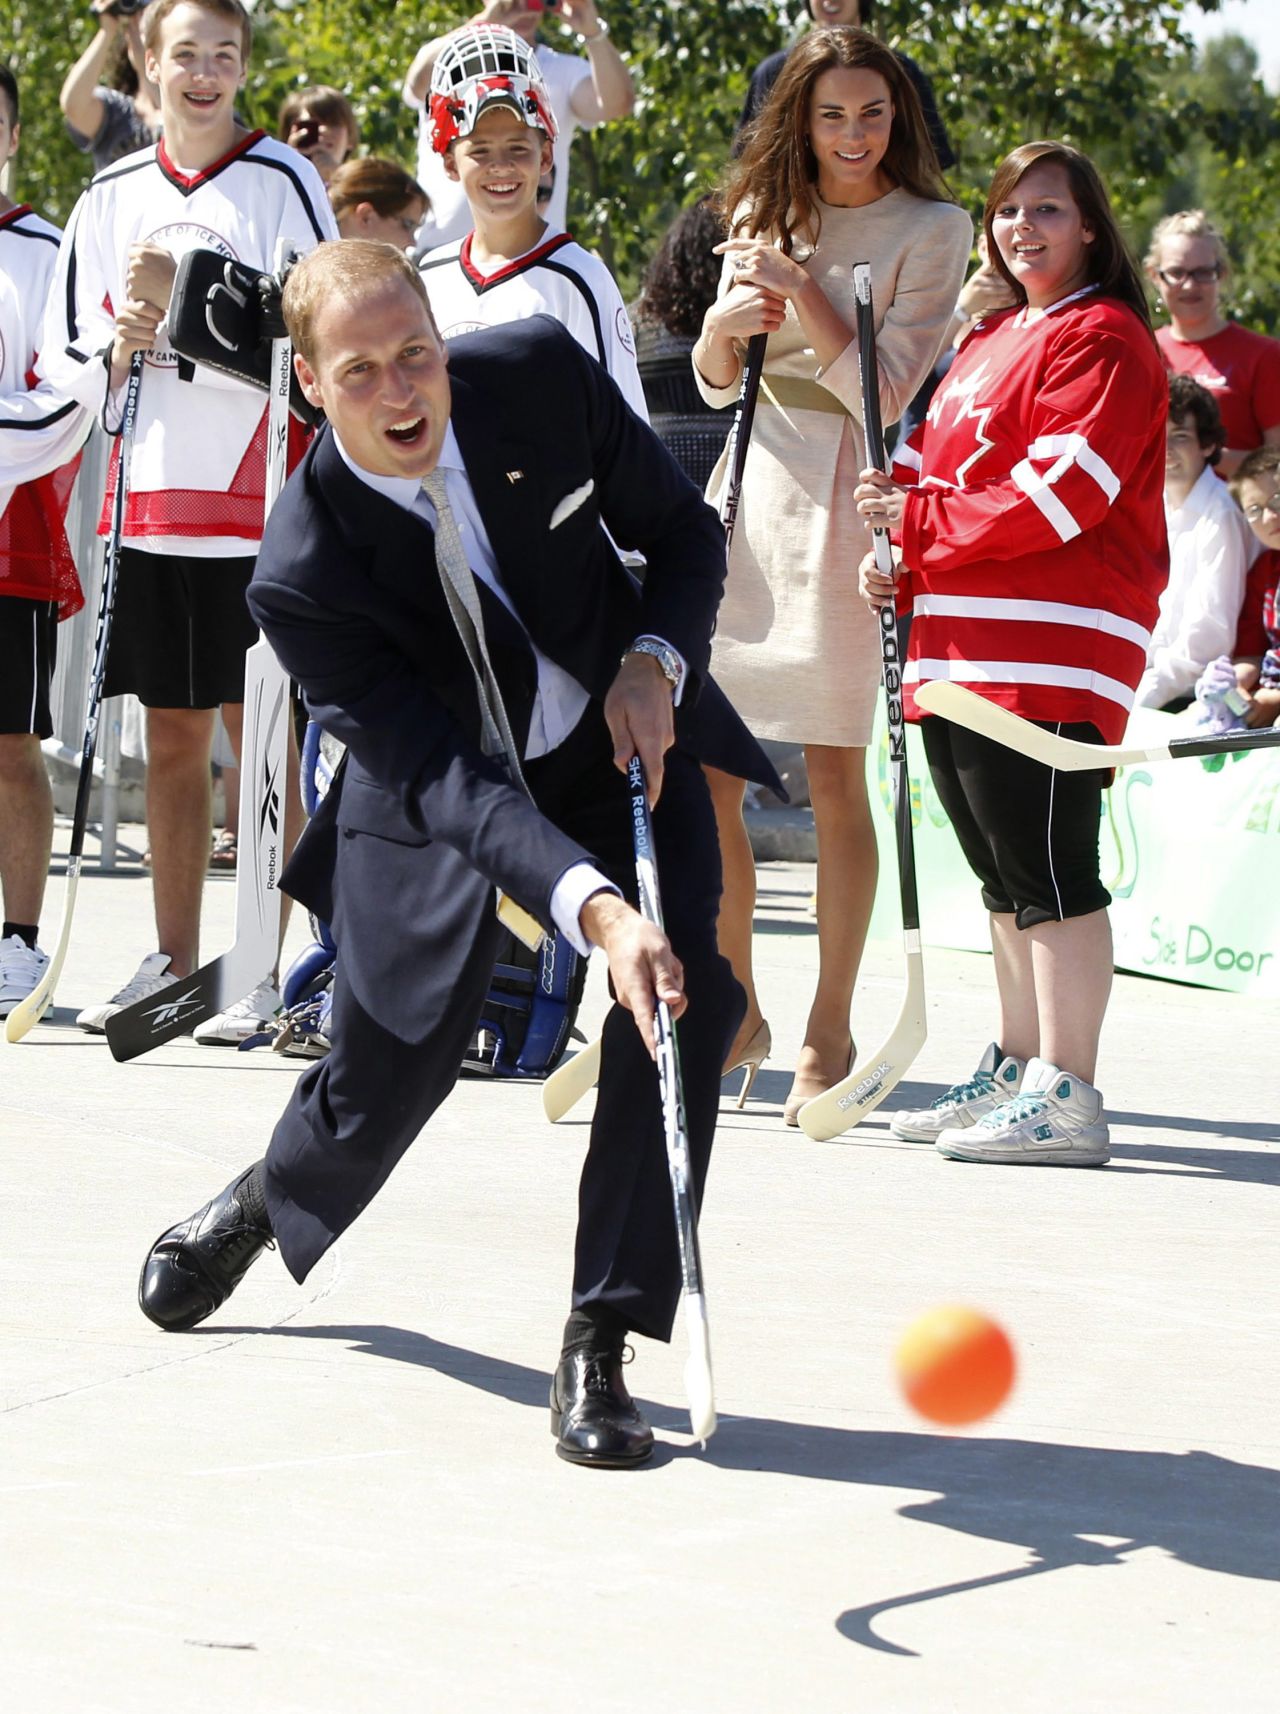 And on the Canadian tour, both he and Kate were given personalized hockey sweaters, after William showed off his skills at the sport. Other gifts from the couple's Canada trip included a quilt, soft toys, several pairs of shoes and a flying helmet.